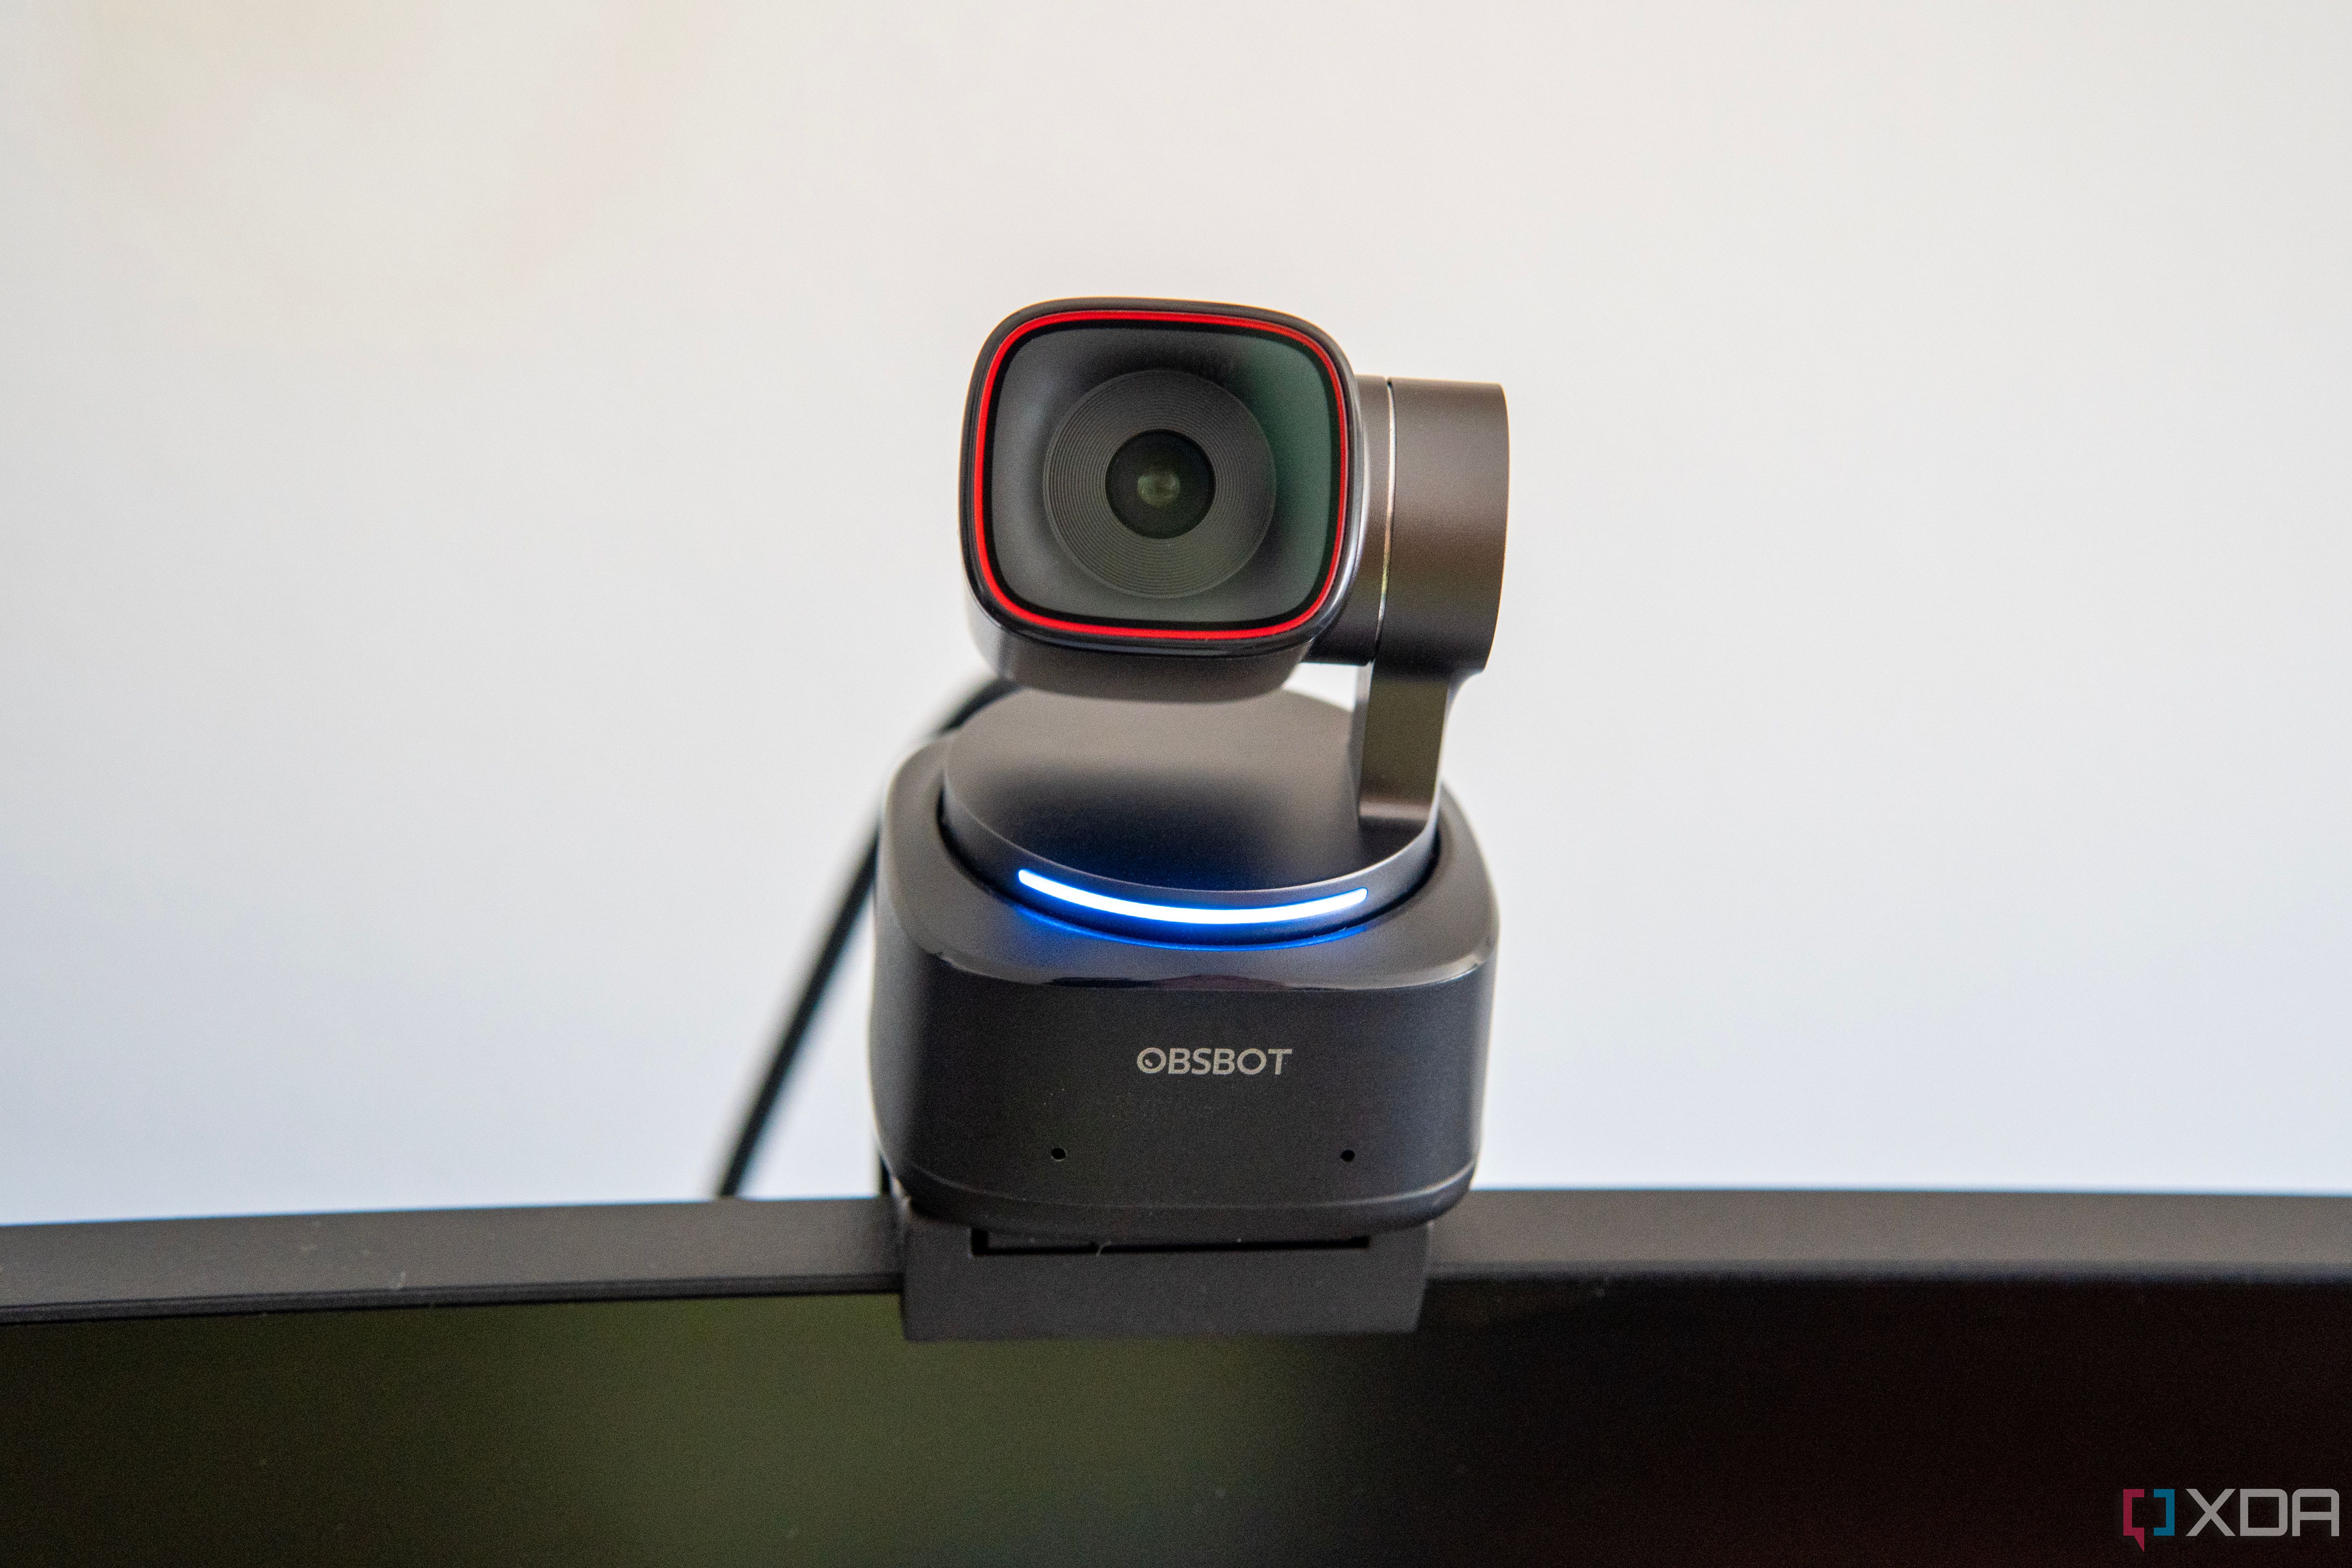 Front view of the Obsbot Tiny 2 webcam